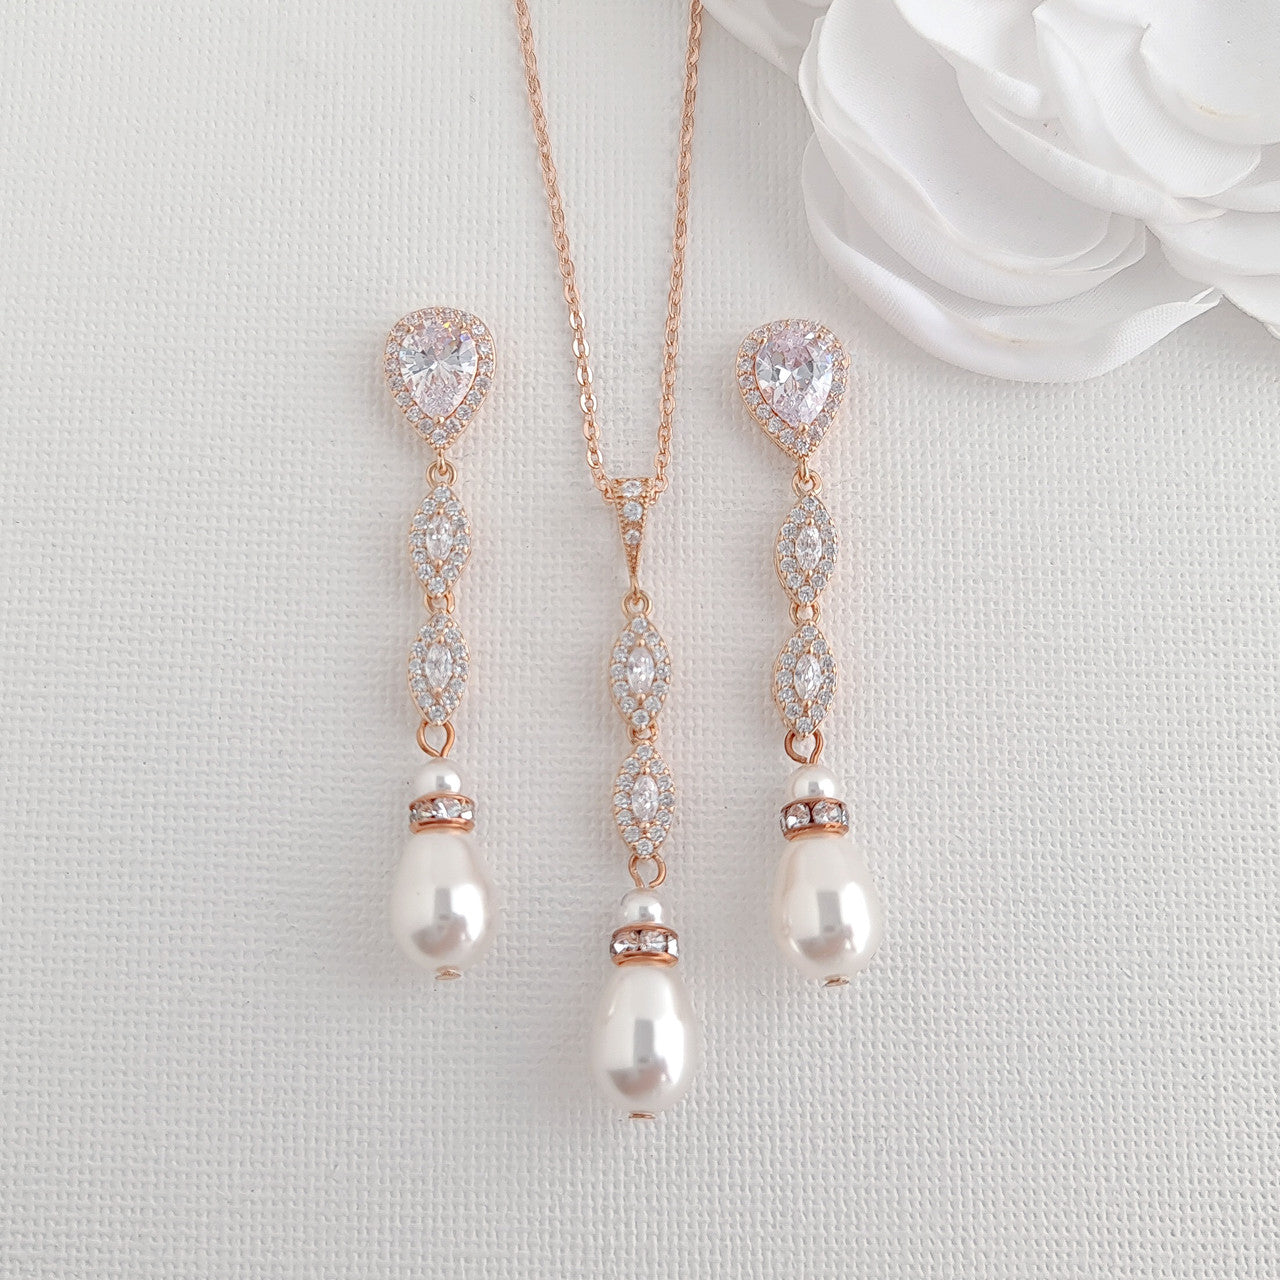 Bridal Jewellery Set With Clip On Earrings Necklace Bracelet- Abby